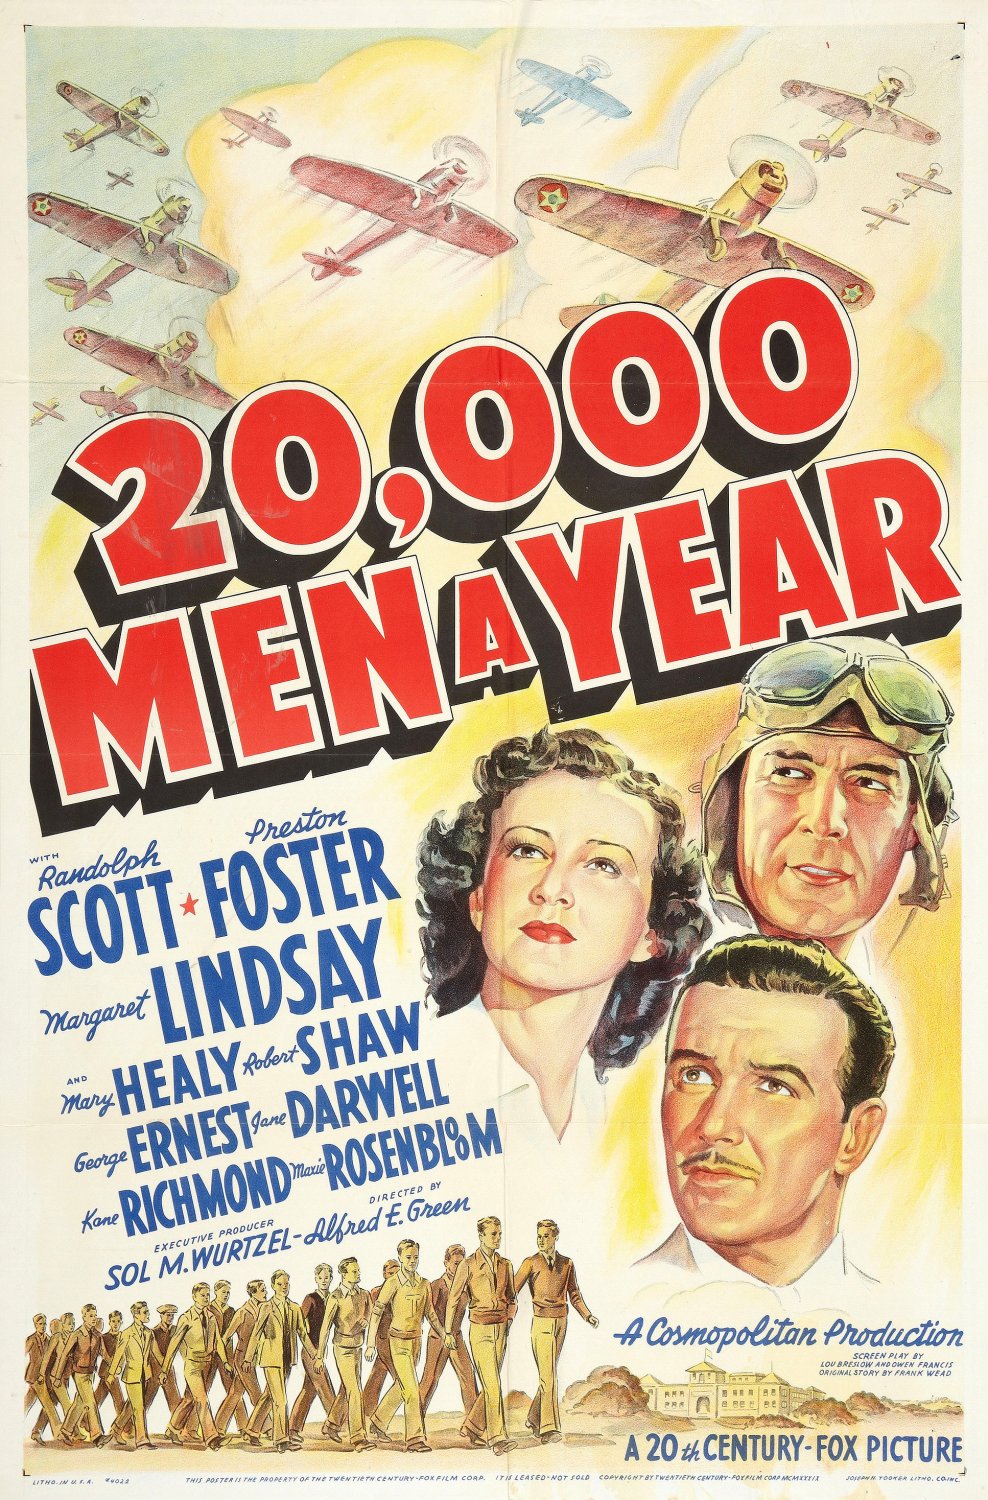 Extra Large Movie Poster Image for 20,000 Men a Year 